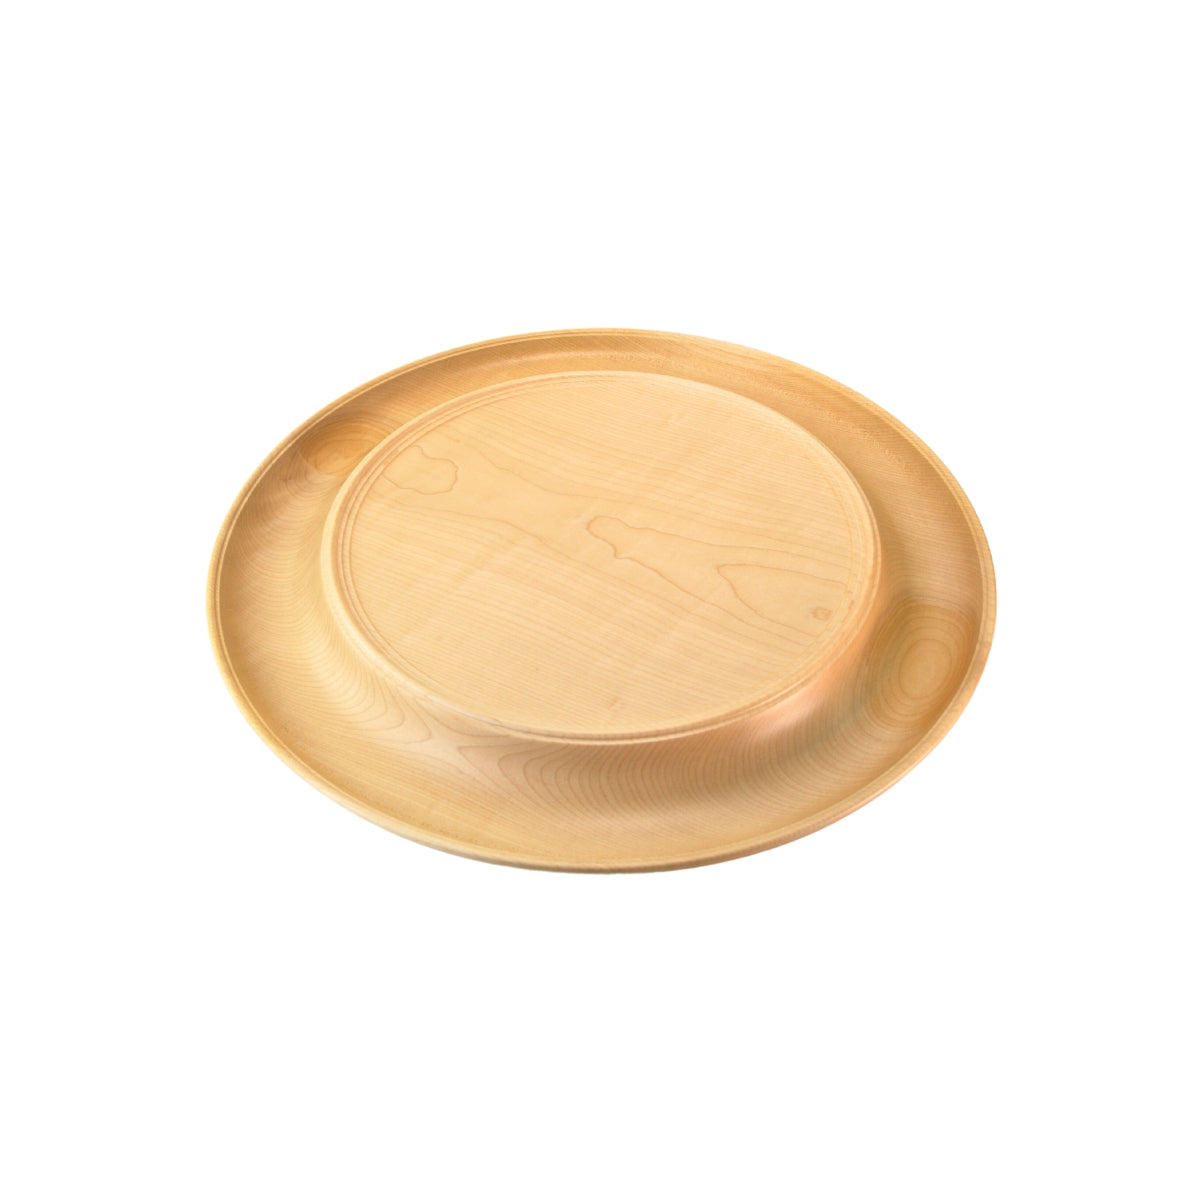 Mader Wooden Rondell for Spinning Tops 